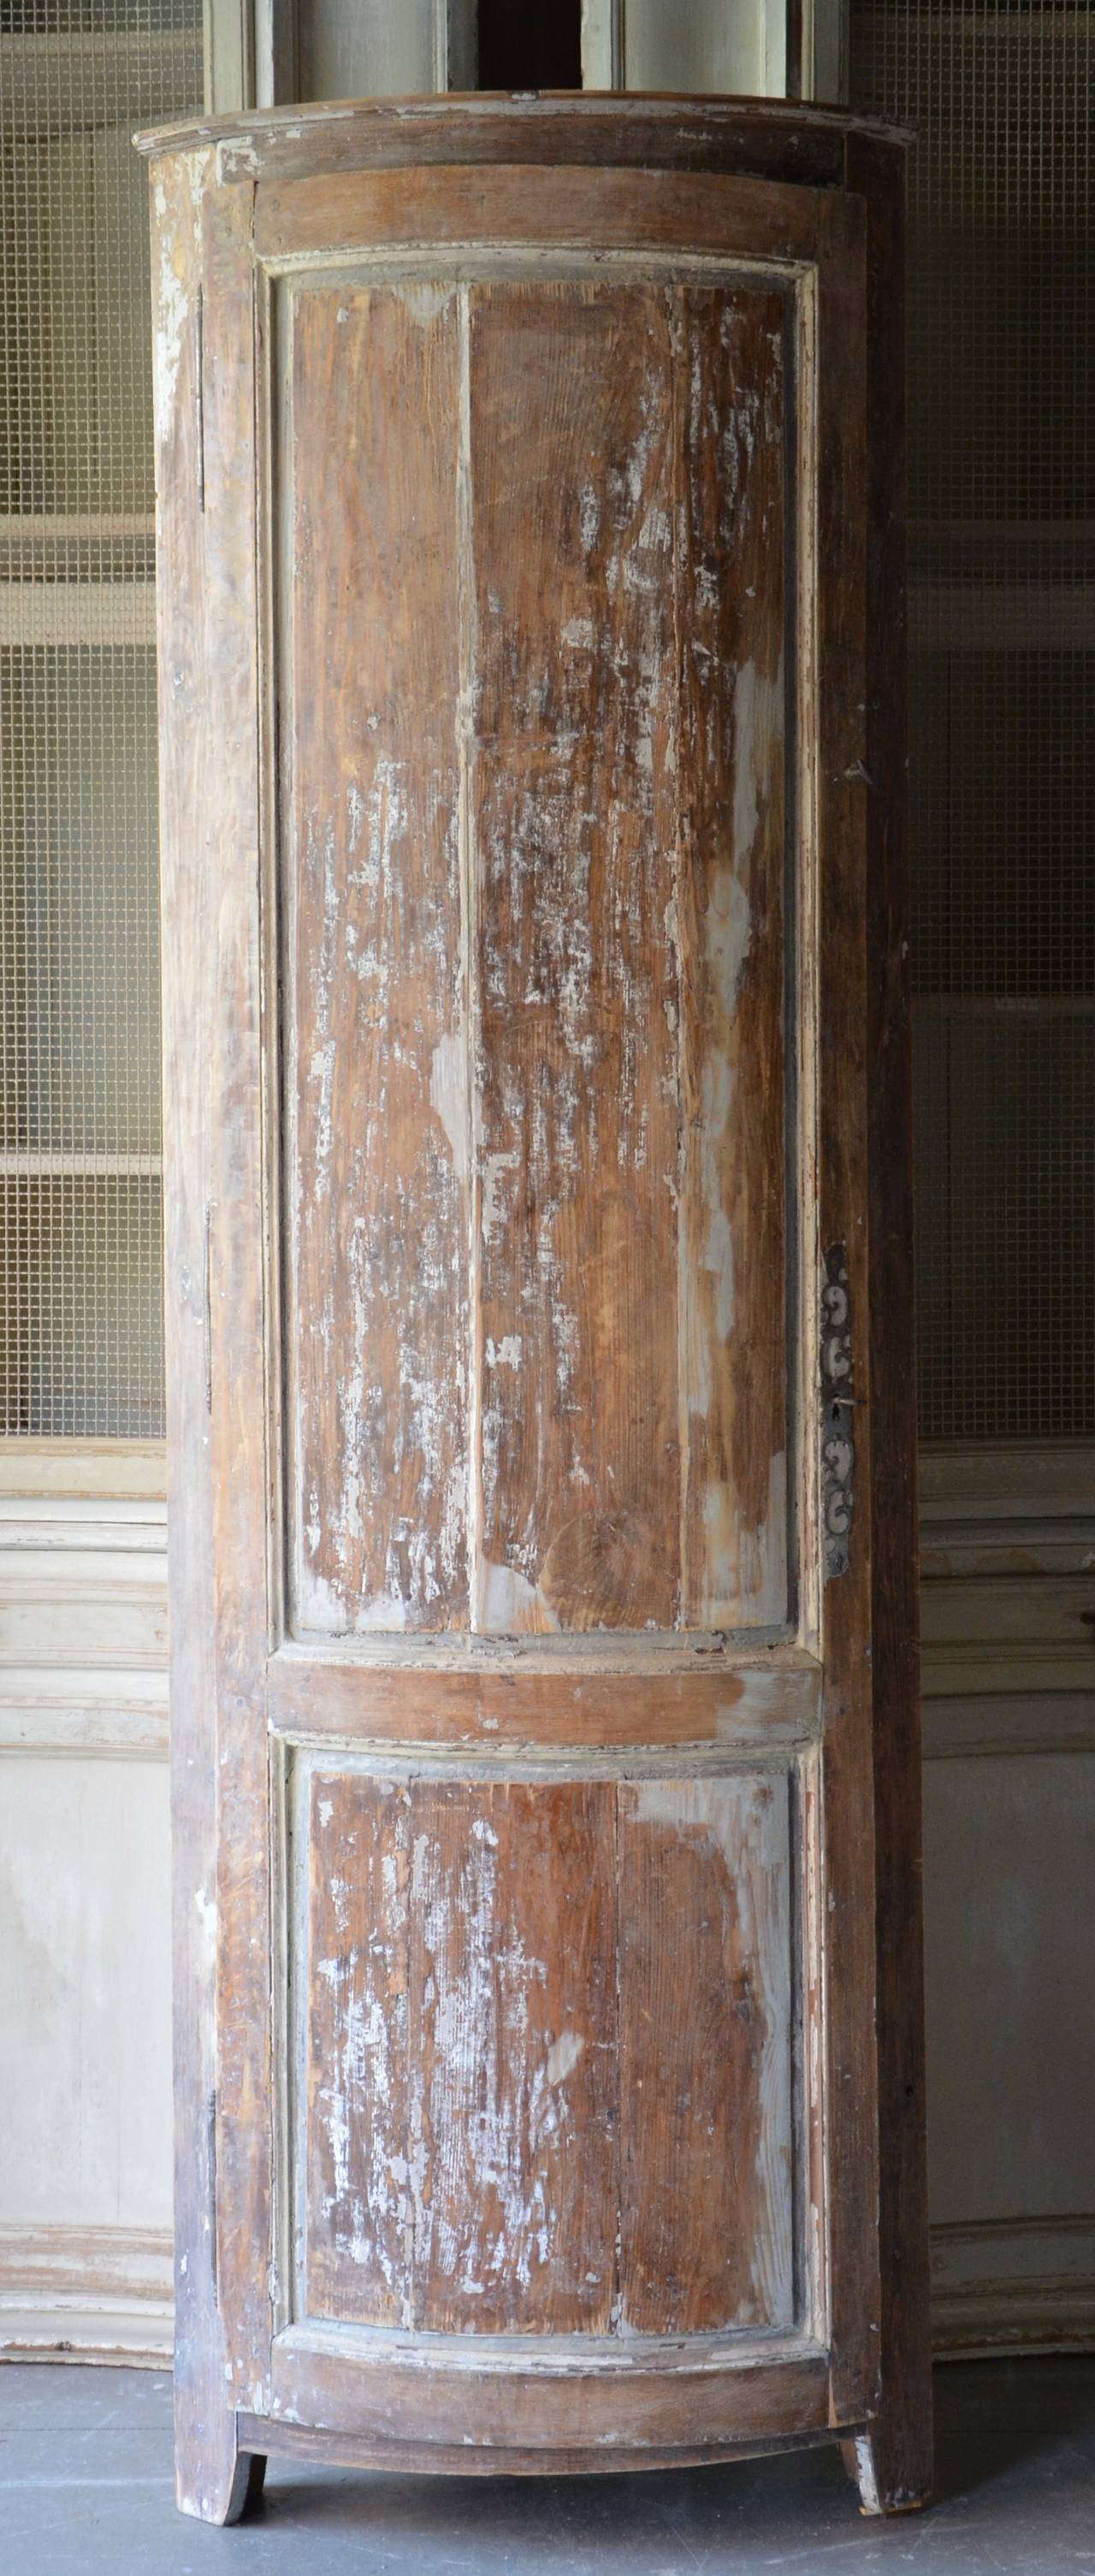 19th century French Louis XV style corner cabinet with careful demilune shape paneled door front craped back to traces of its original paint.
France, circa 1860.